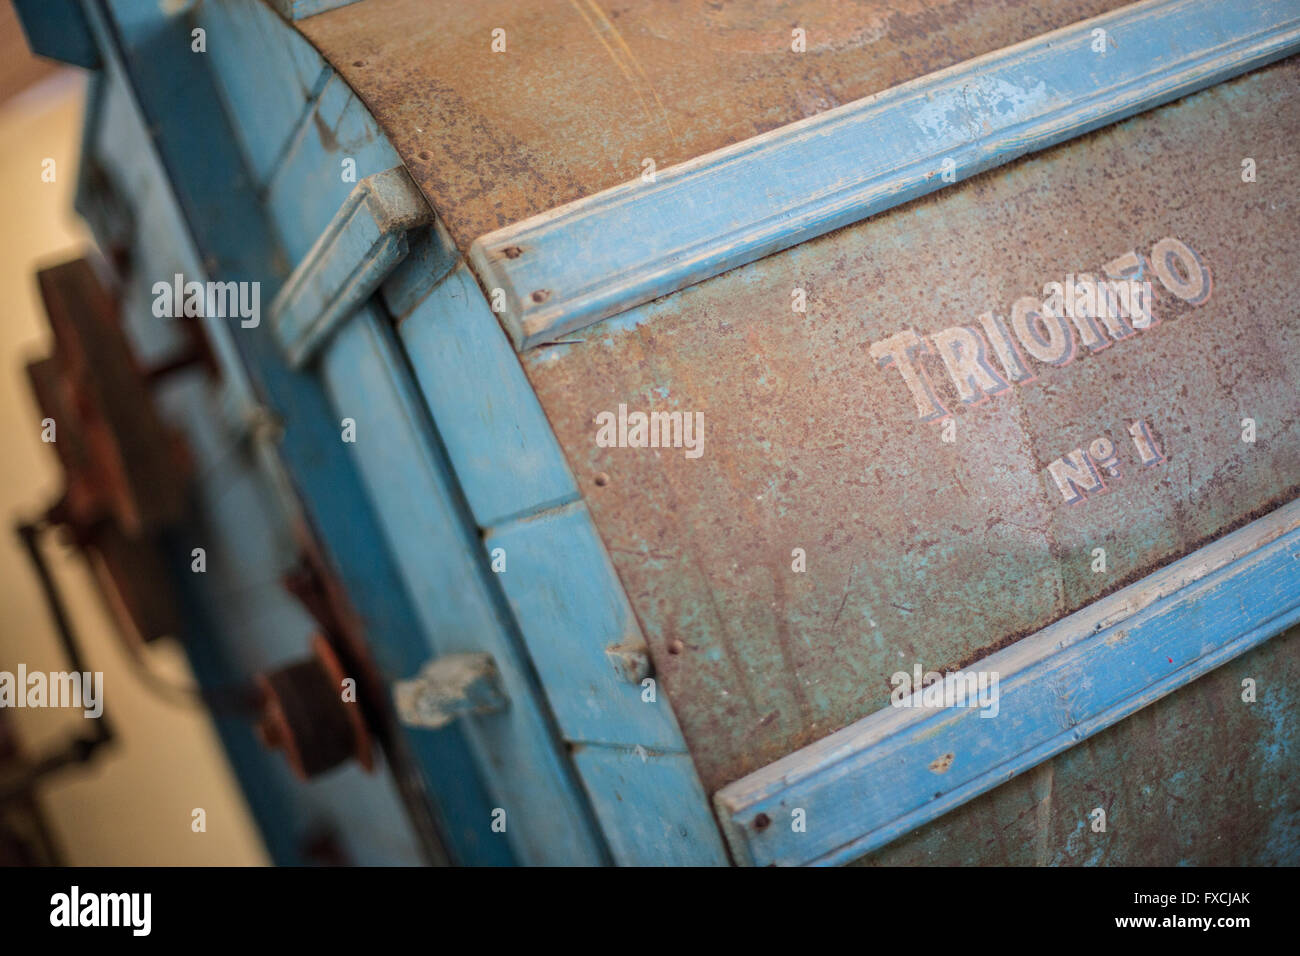 Seeds, grain cleaning machine Trionfo Stock Photo